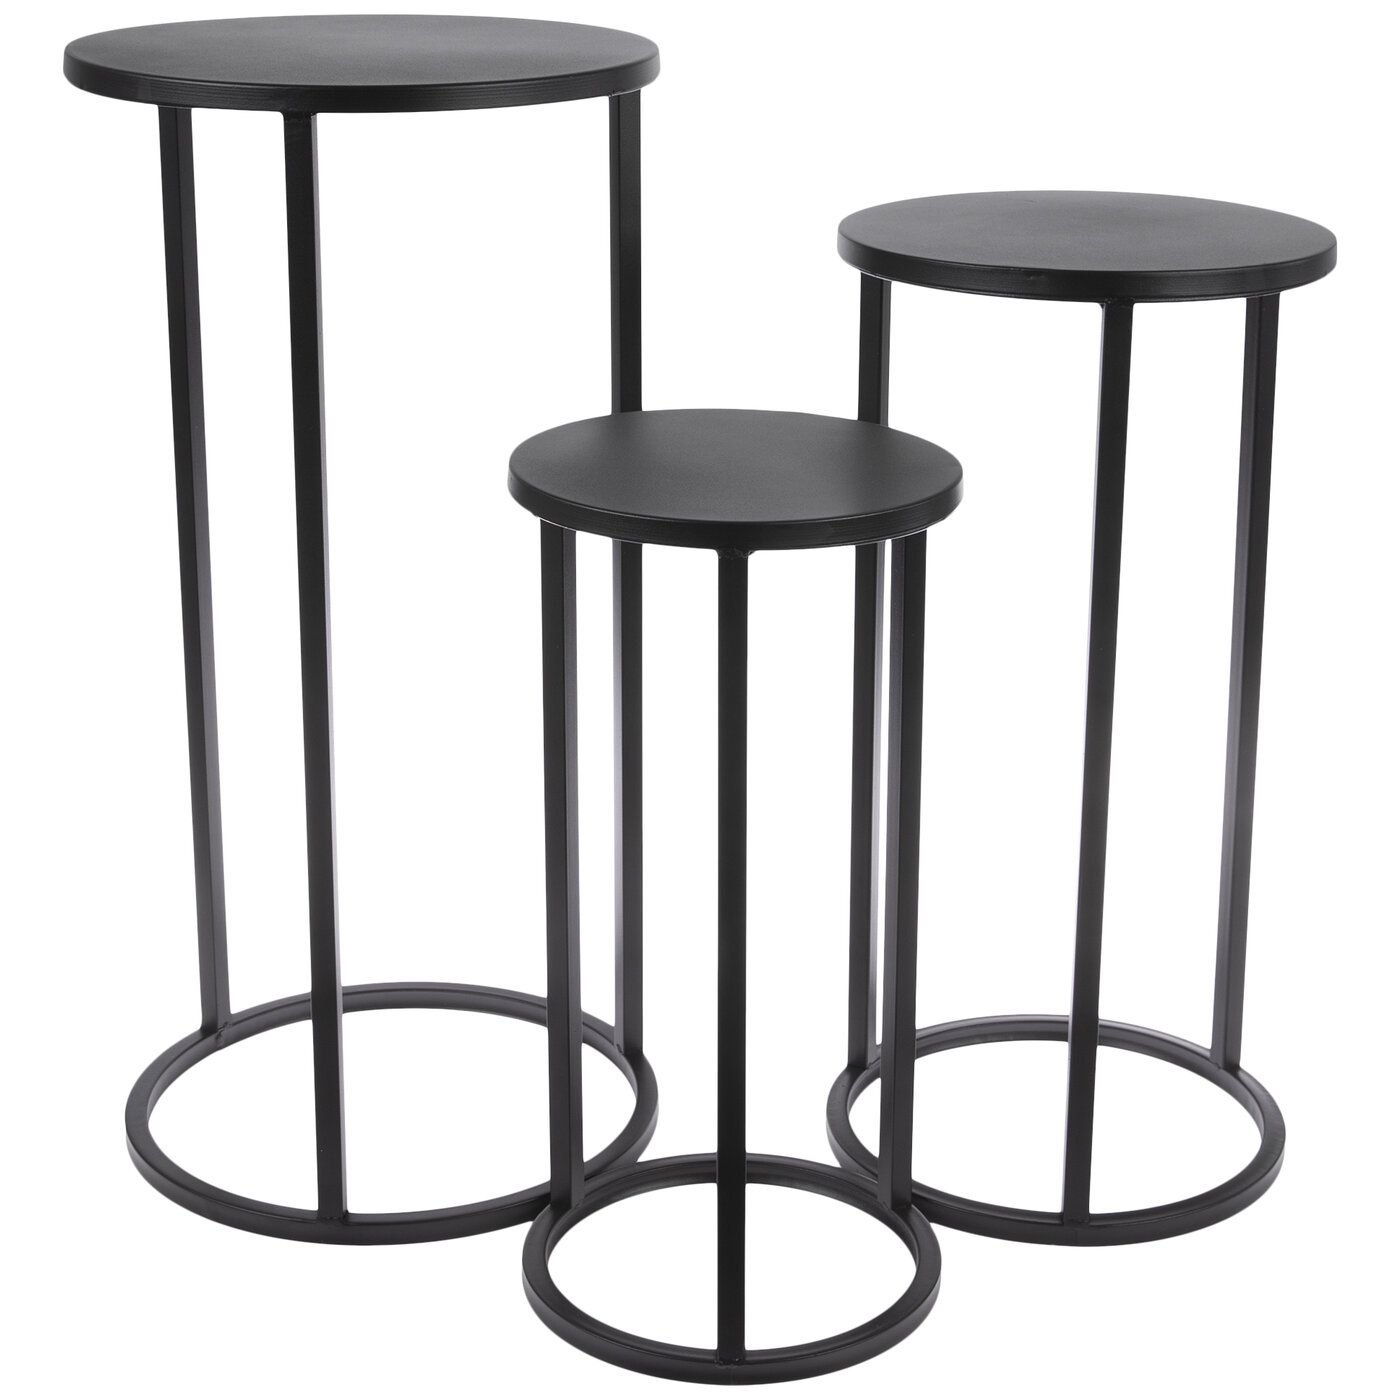 Black Metal Plant Stand Set – Tall | Hobby Lobby | 81057483 Inside Black Plant Stands (View 12 of 15)